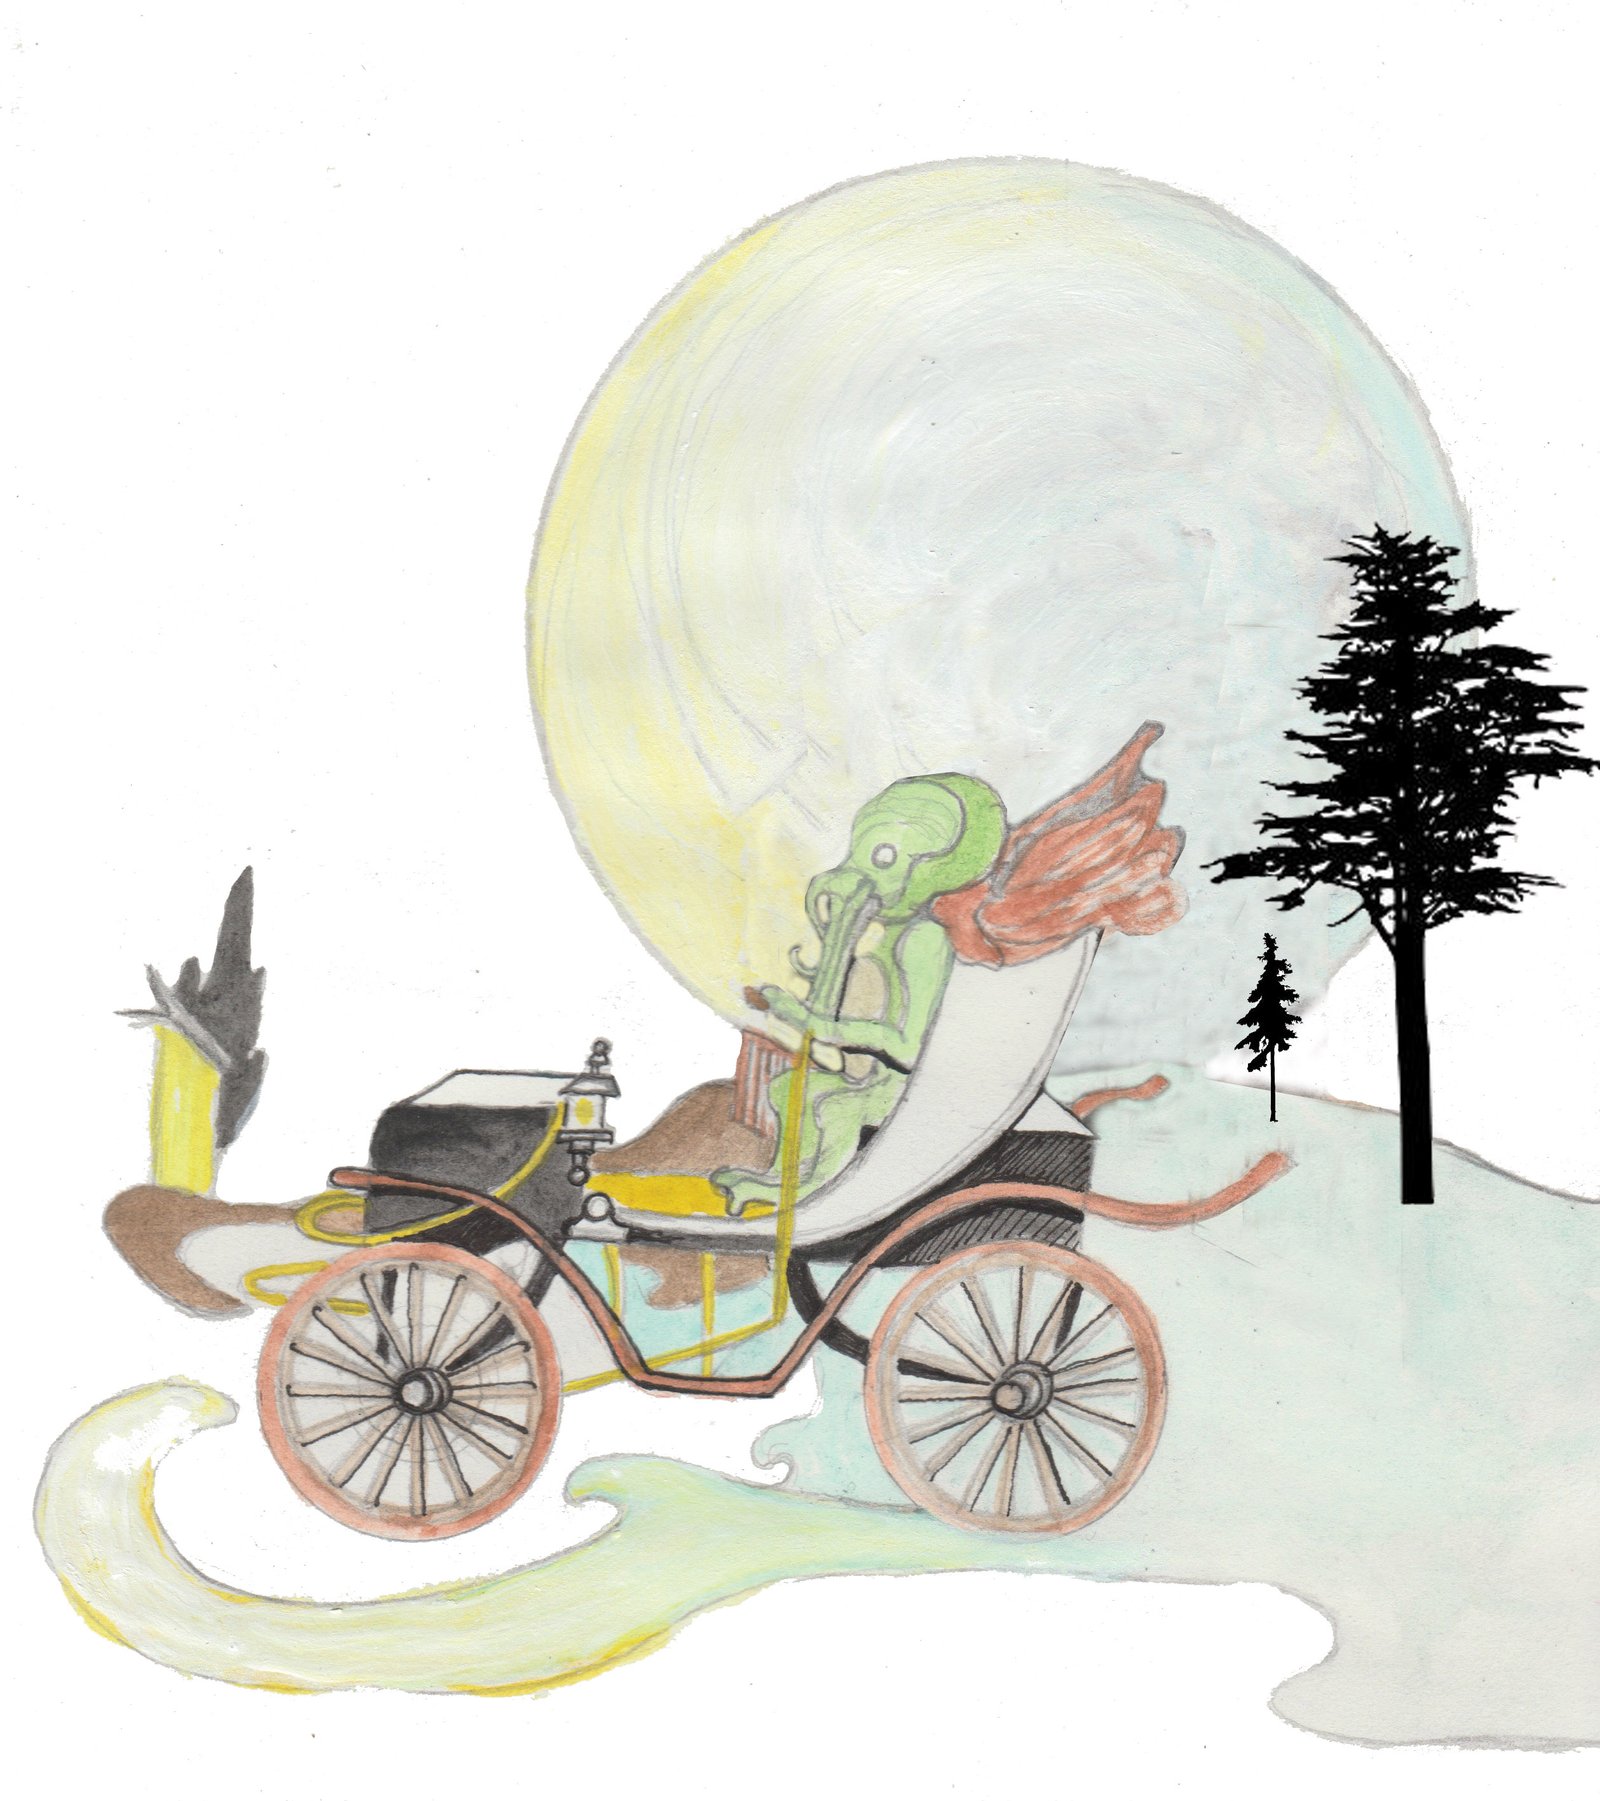 Cthulu in jalopy with moon in background and pine trees.